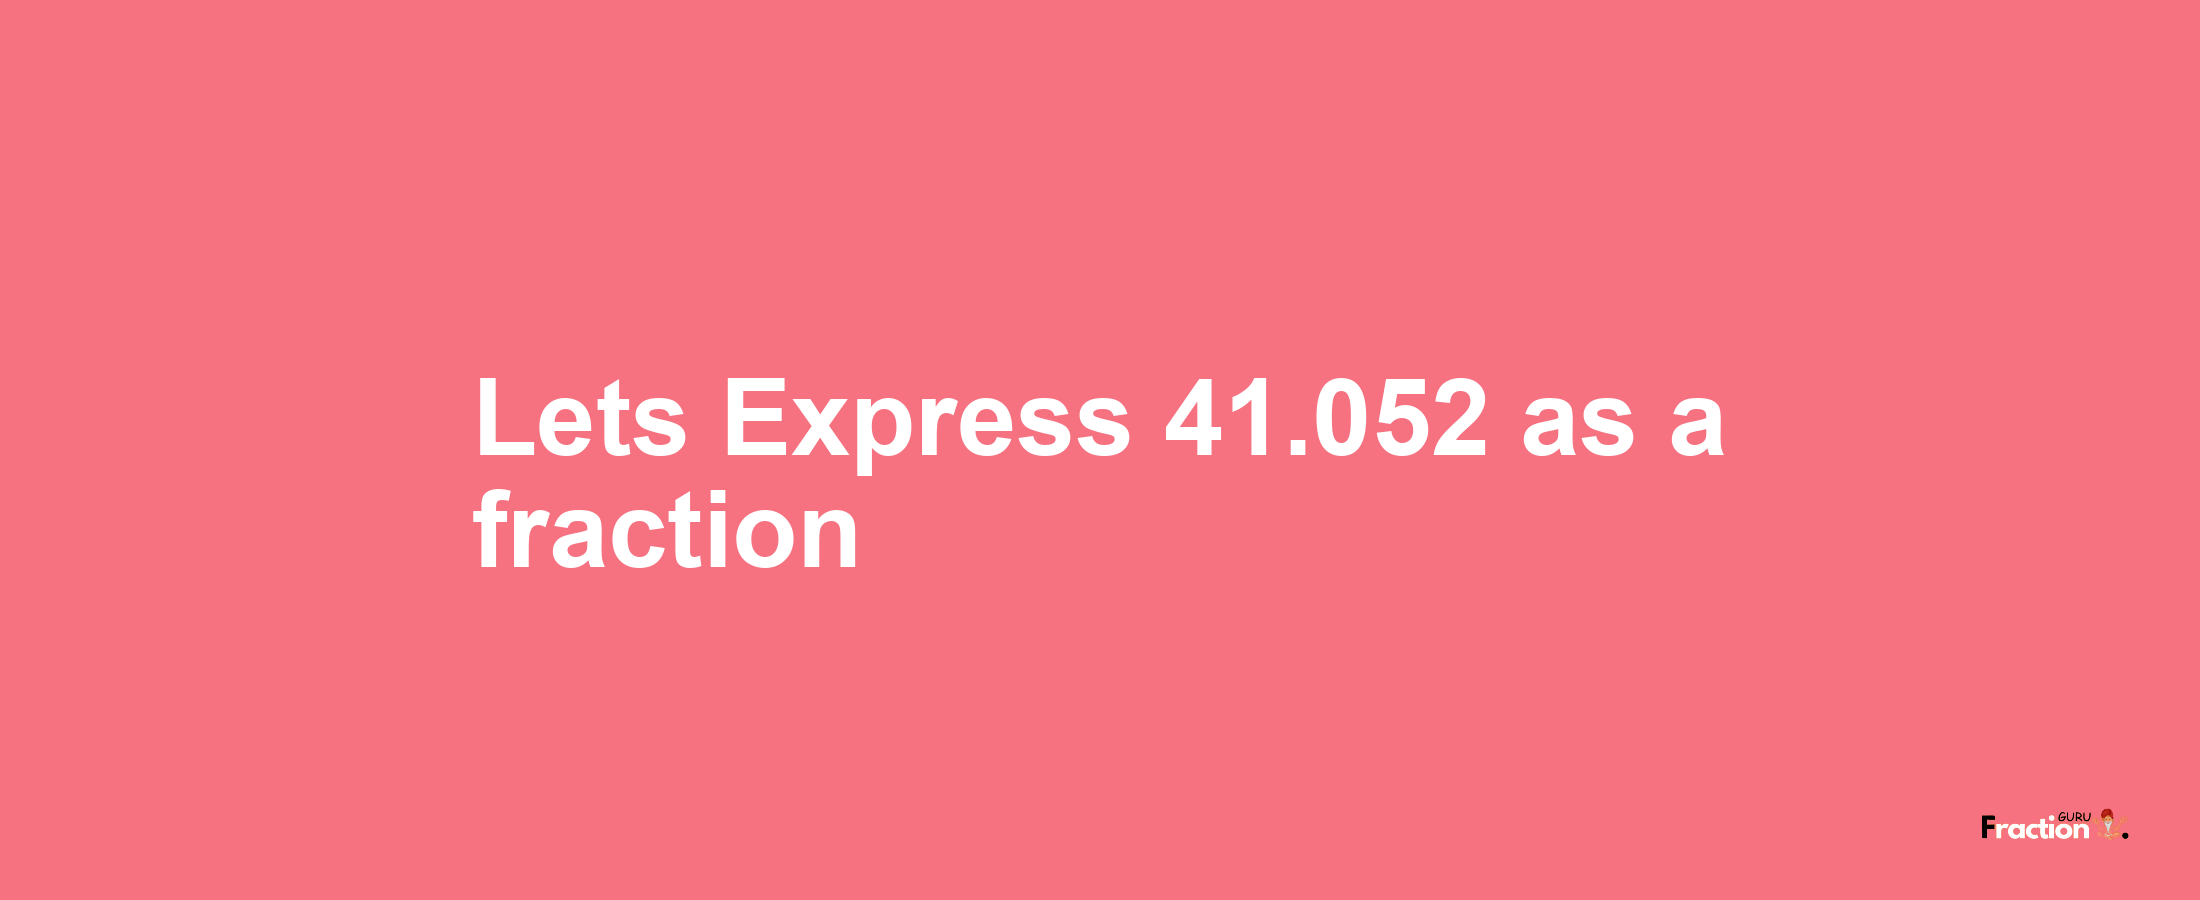 Lets Express 41.052 as afraction